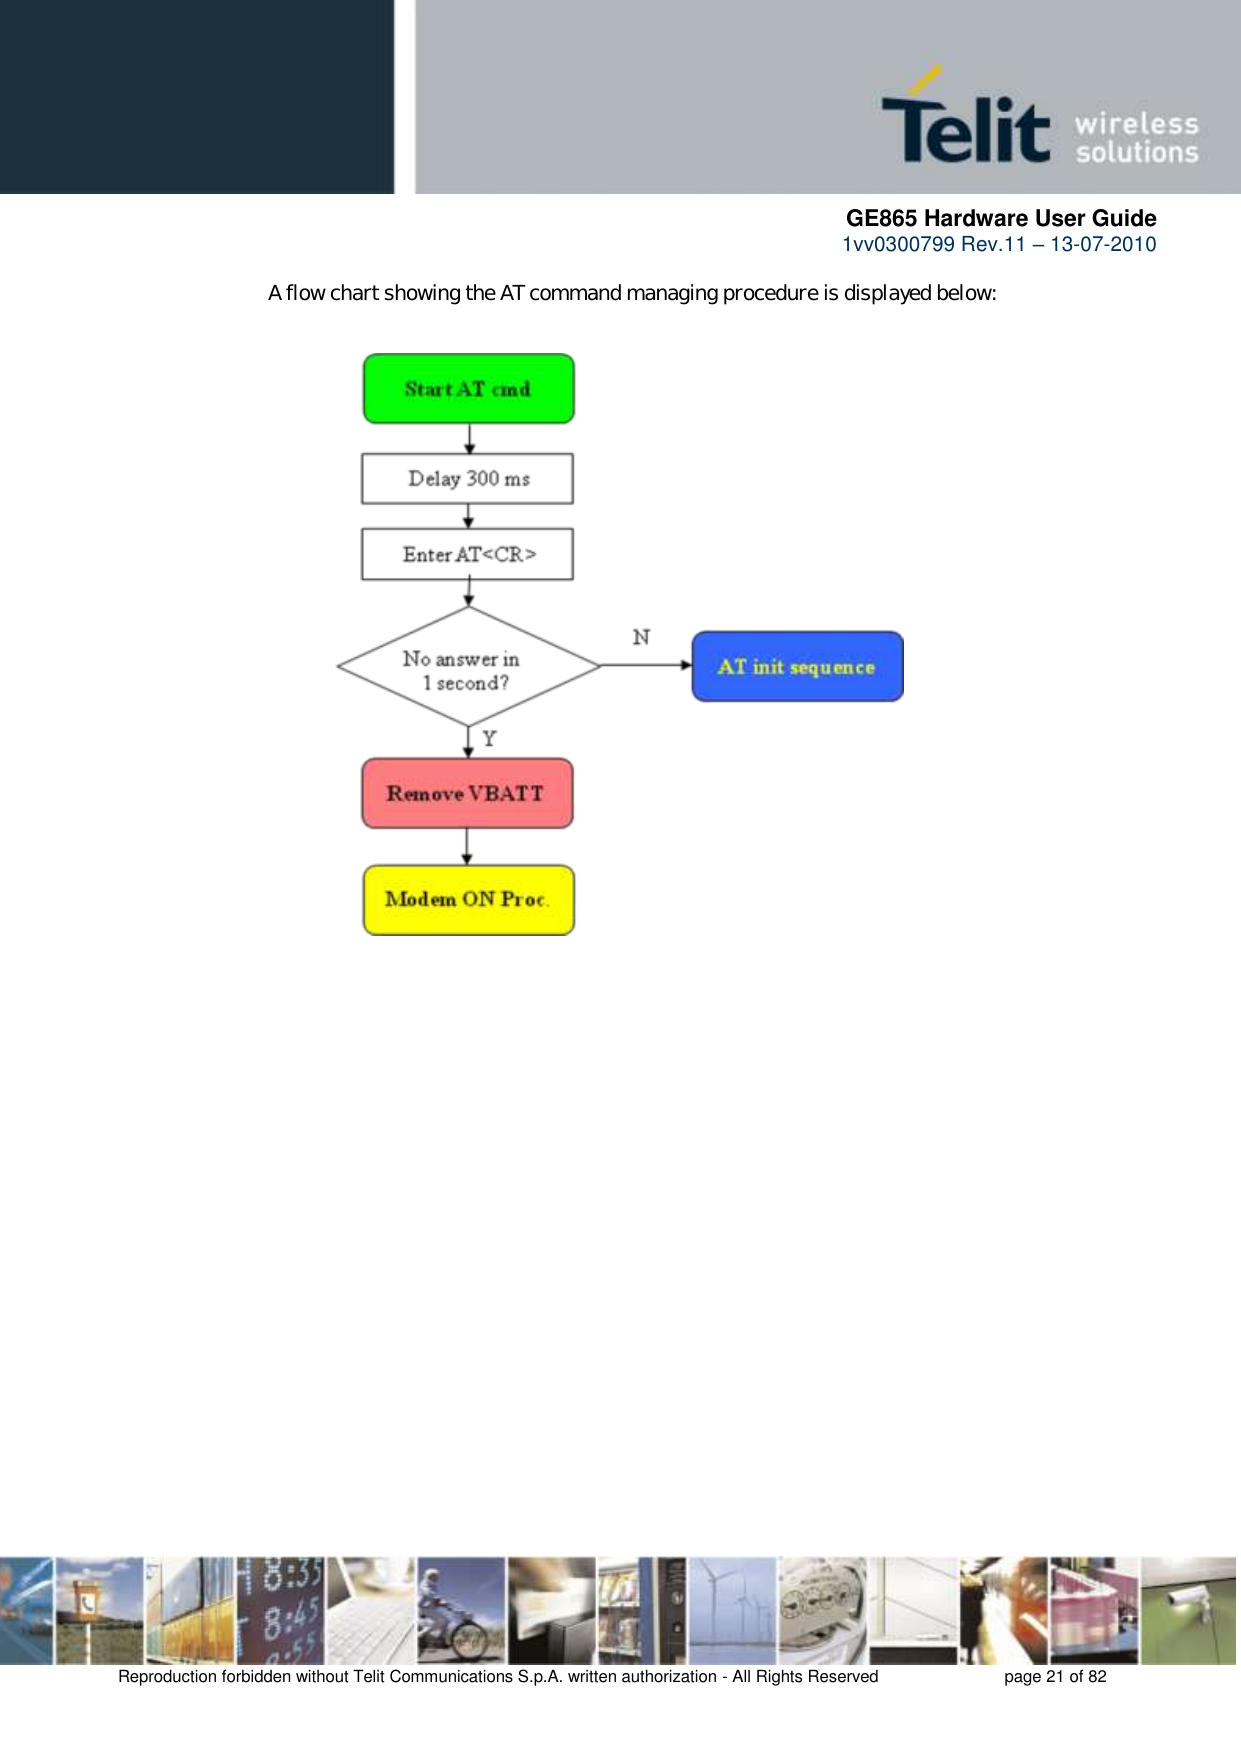      GE865 Hardware User Guide 1vv0300799 Rev.11 – 13-07-2010       Reproduction forbidden without Telit Communications S.p.A. written authorization - All Rights Reserved    page 21 of 82  A flow chart showing the AT command managing procedure is displayed below:                            